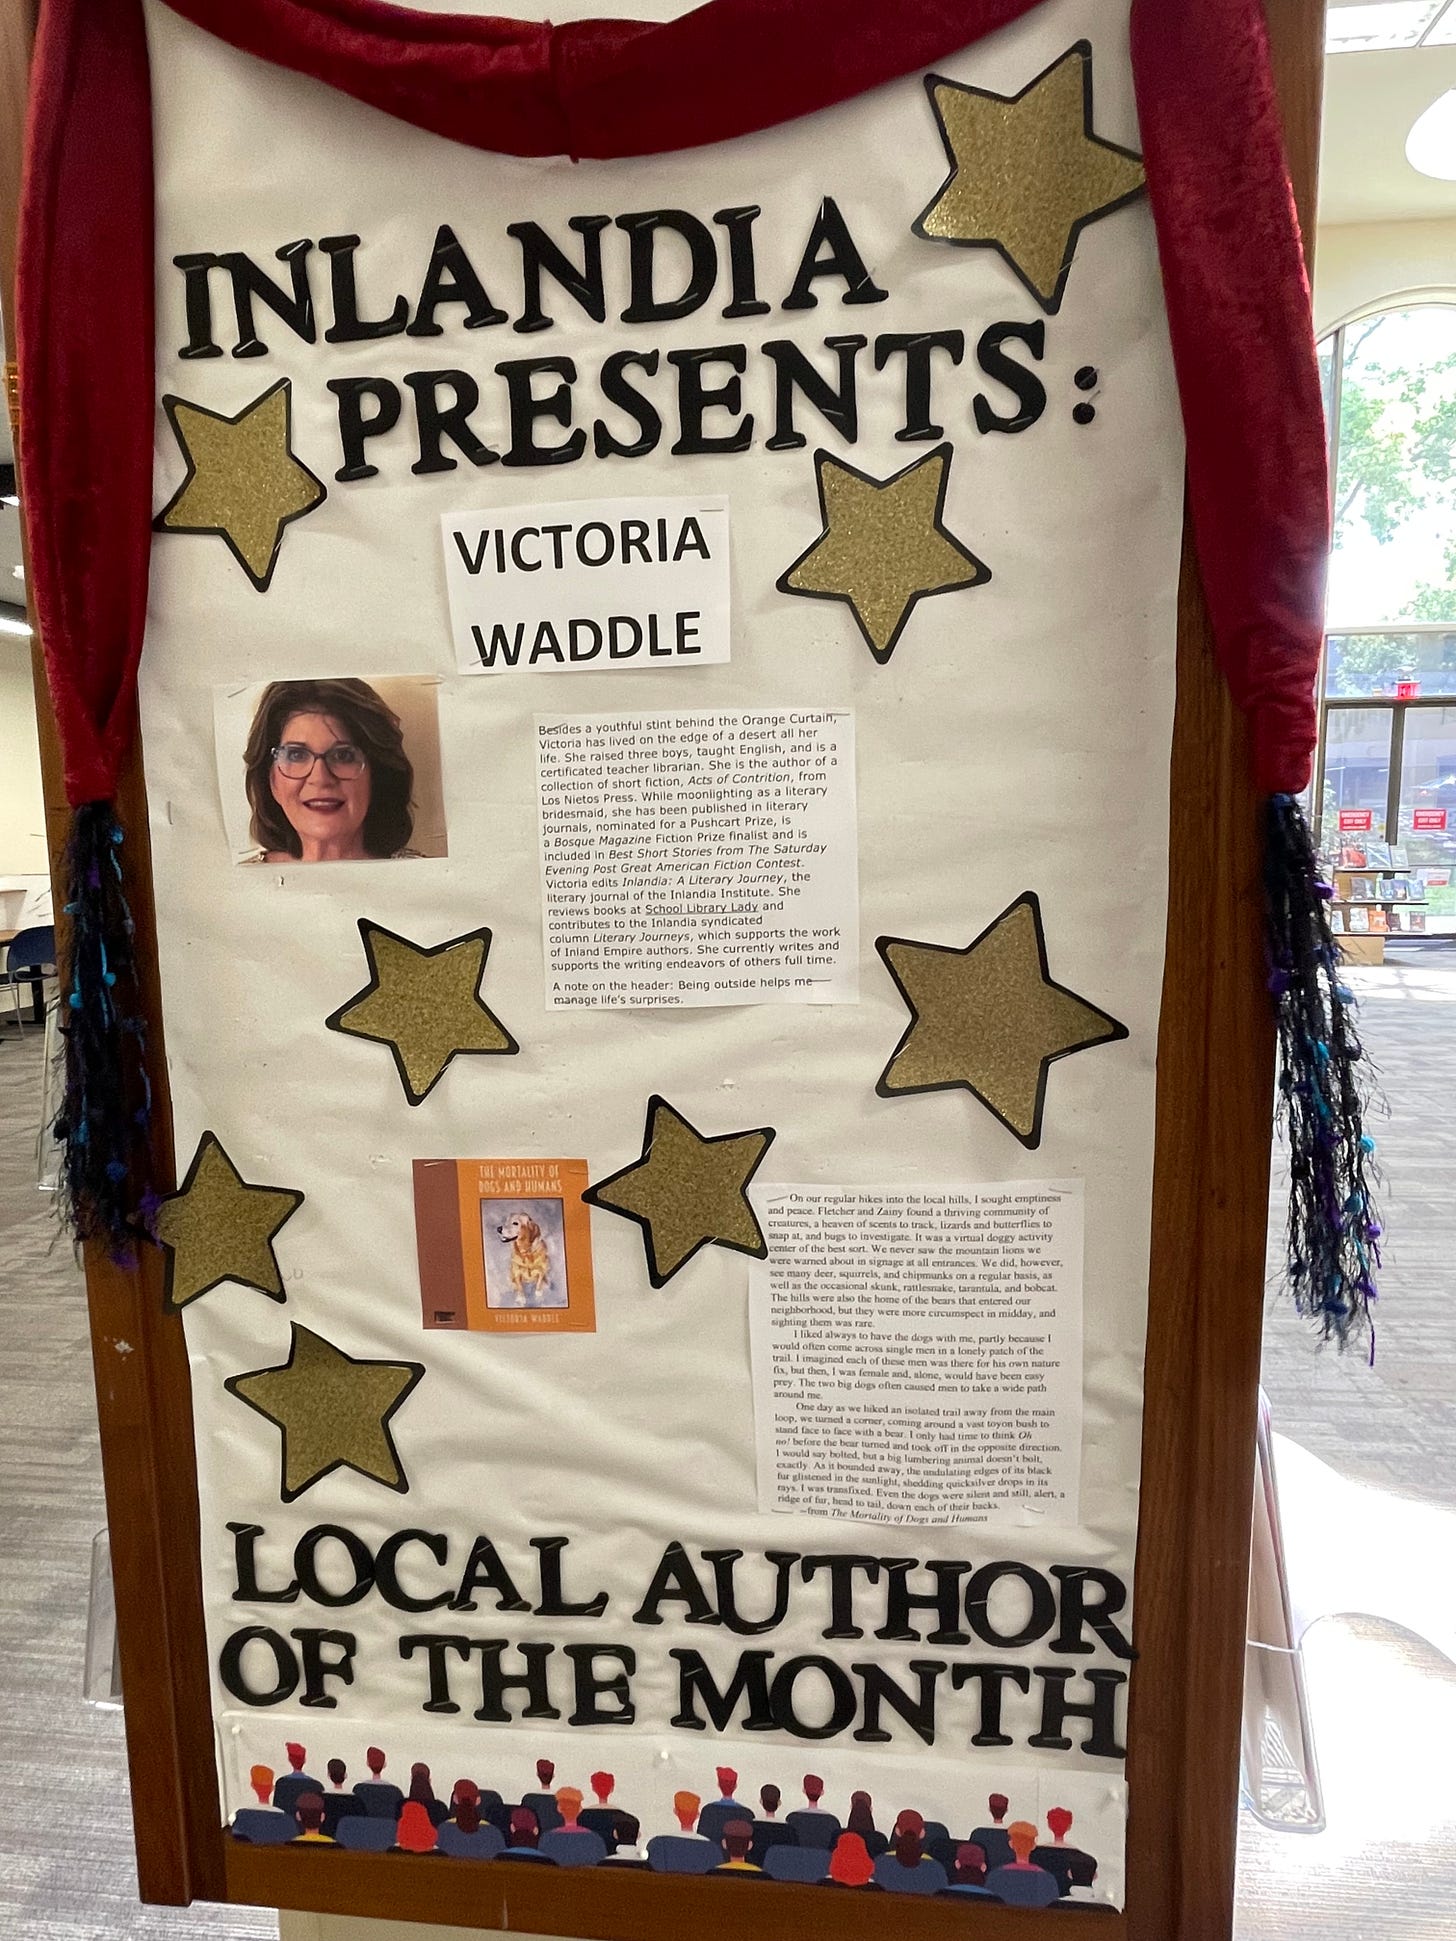 A bulletin board with an image of teh author, a few stars, a book cover with a dog and some quotes from her work.